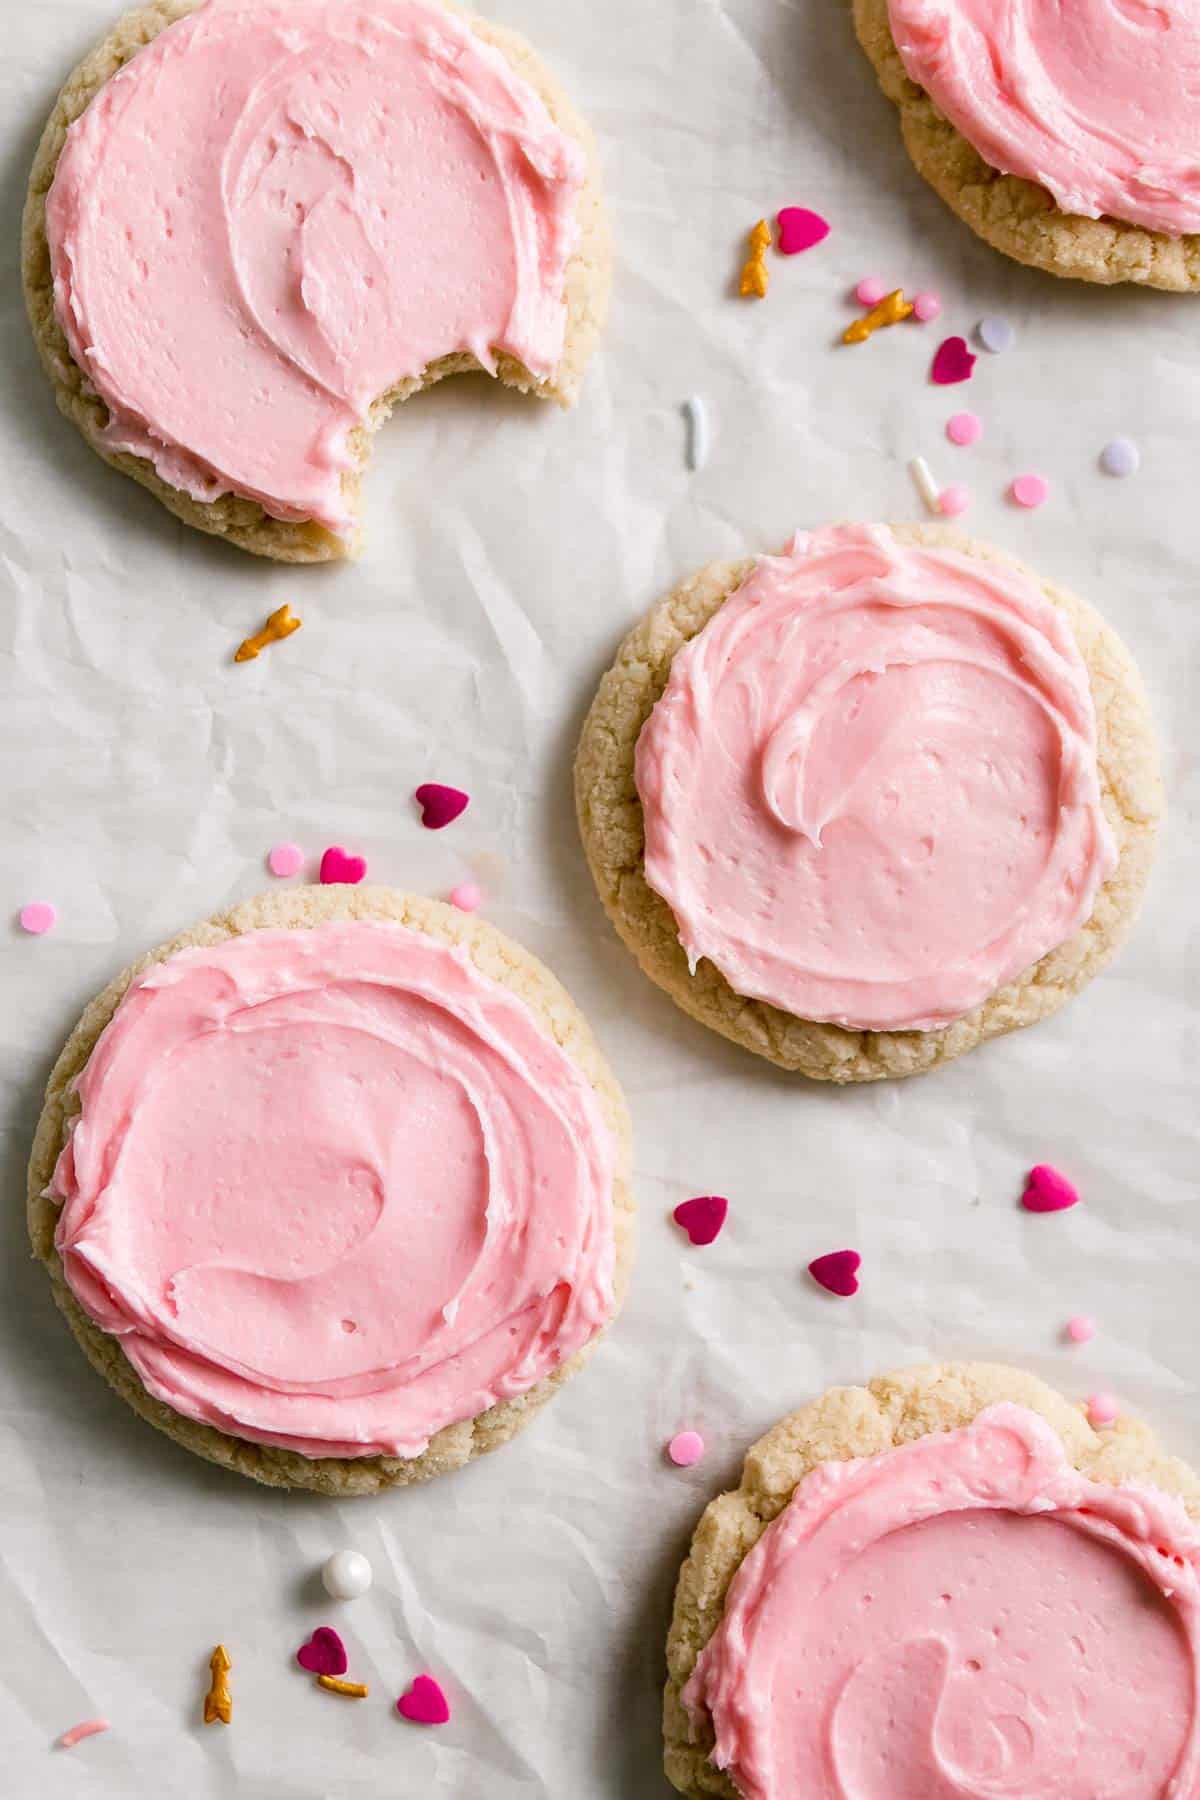 Sugar cookies topped with swirl of pink frosting scattered on crumpled parchment. Heart shaped sprinkles scattered around.